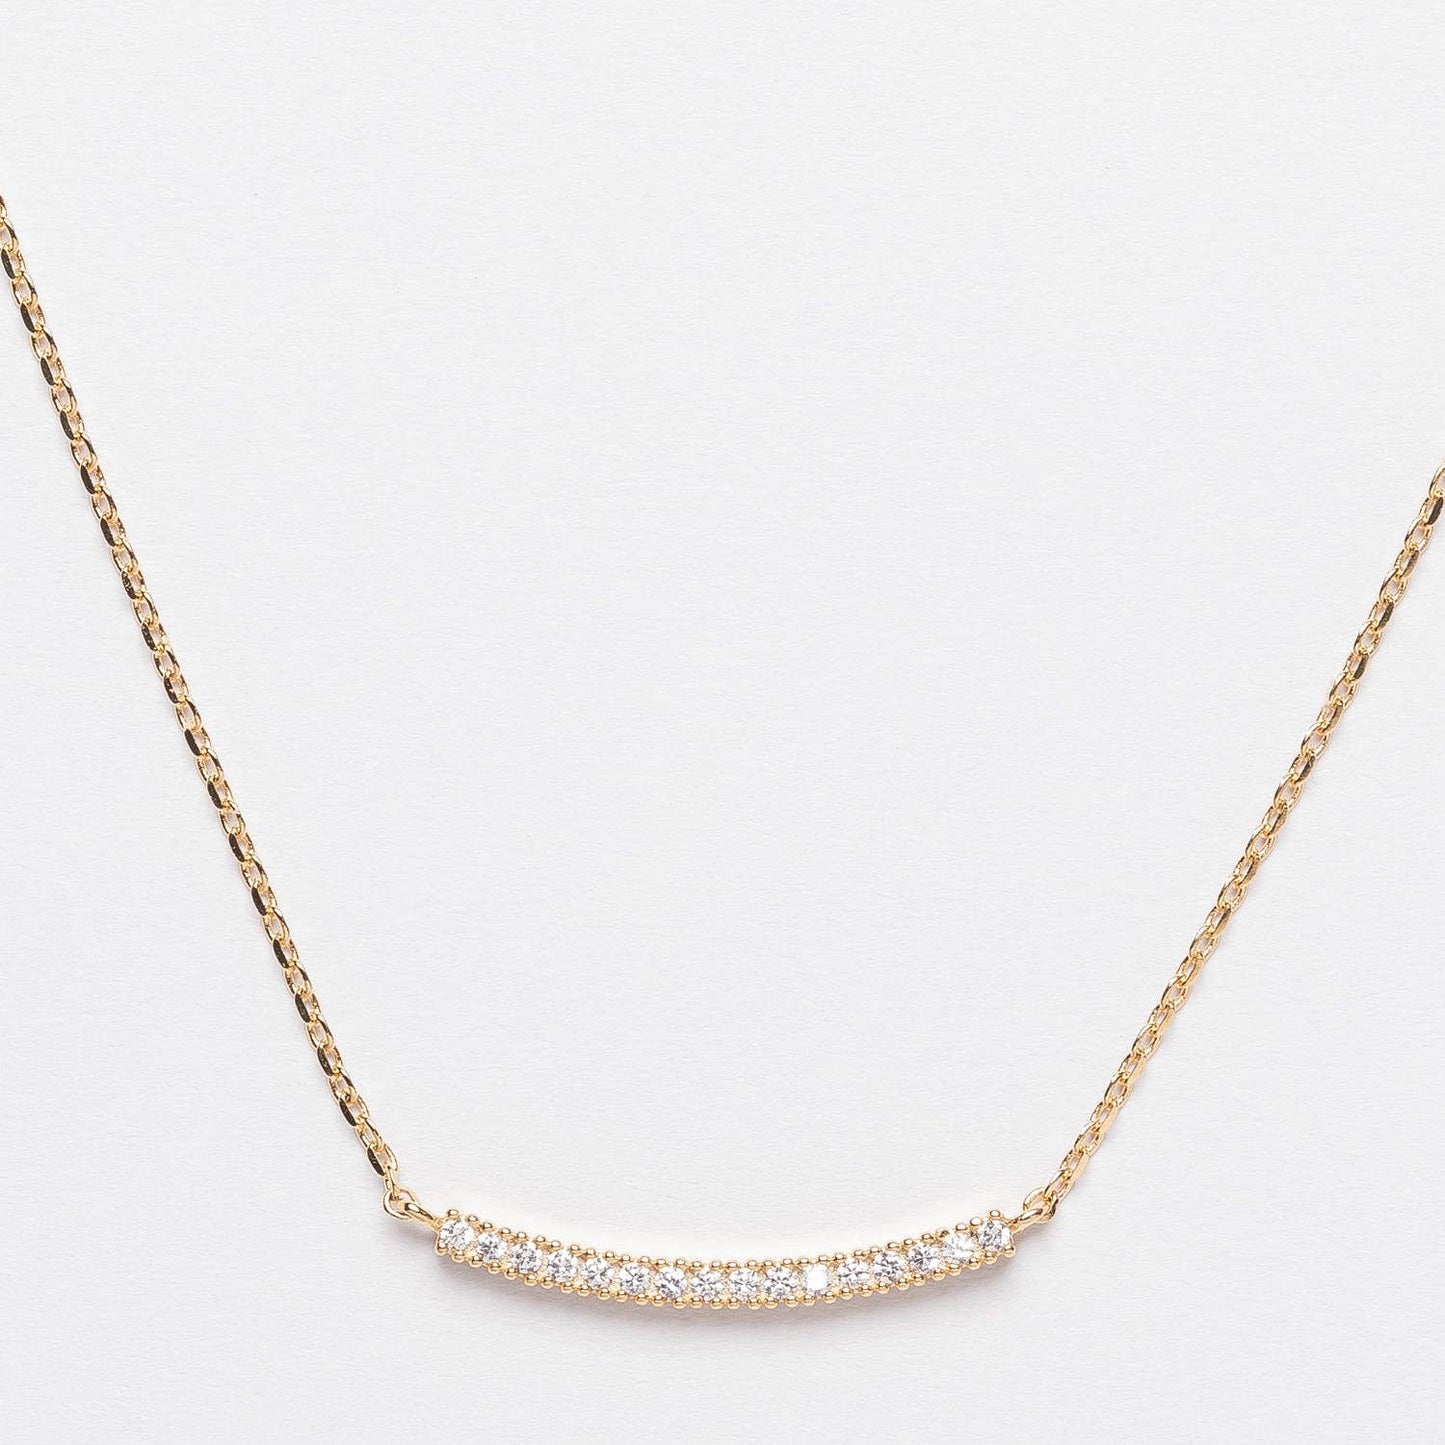 Everyday Wear 18K Gold Dipped Necklace